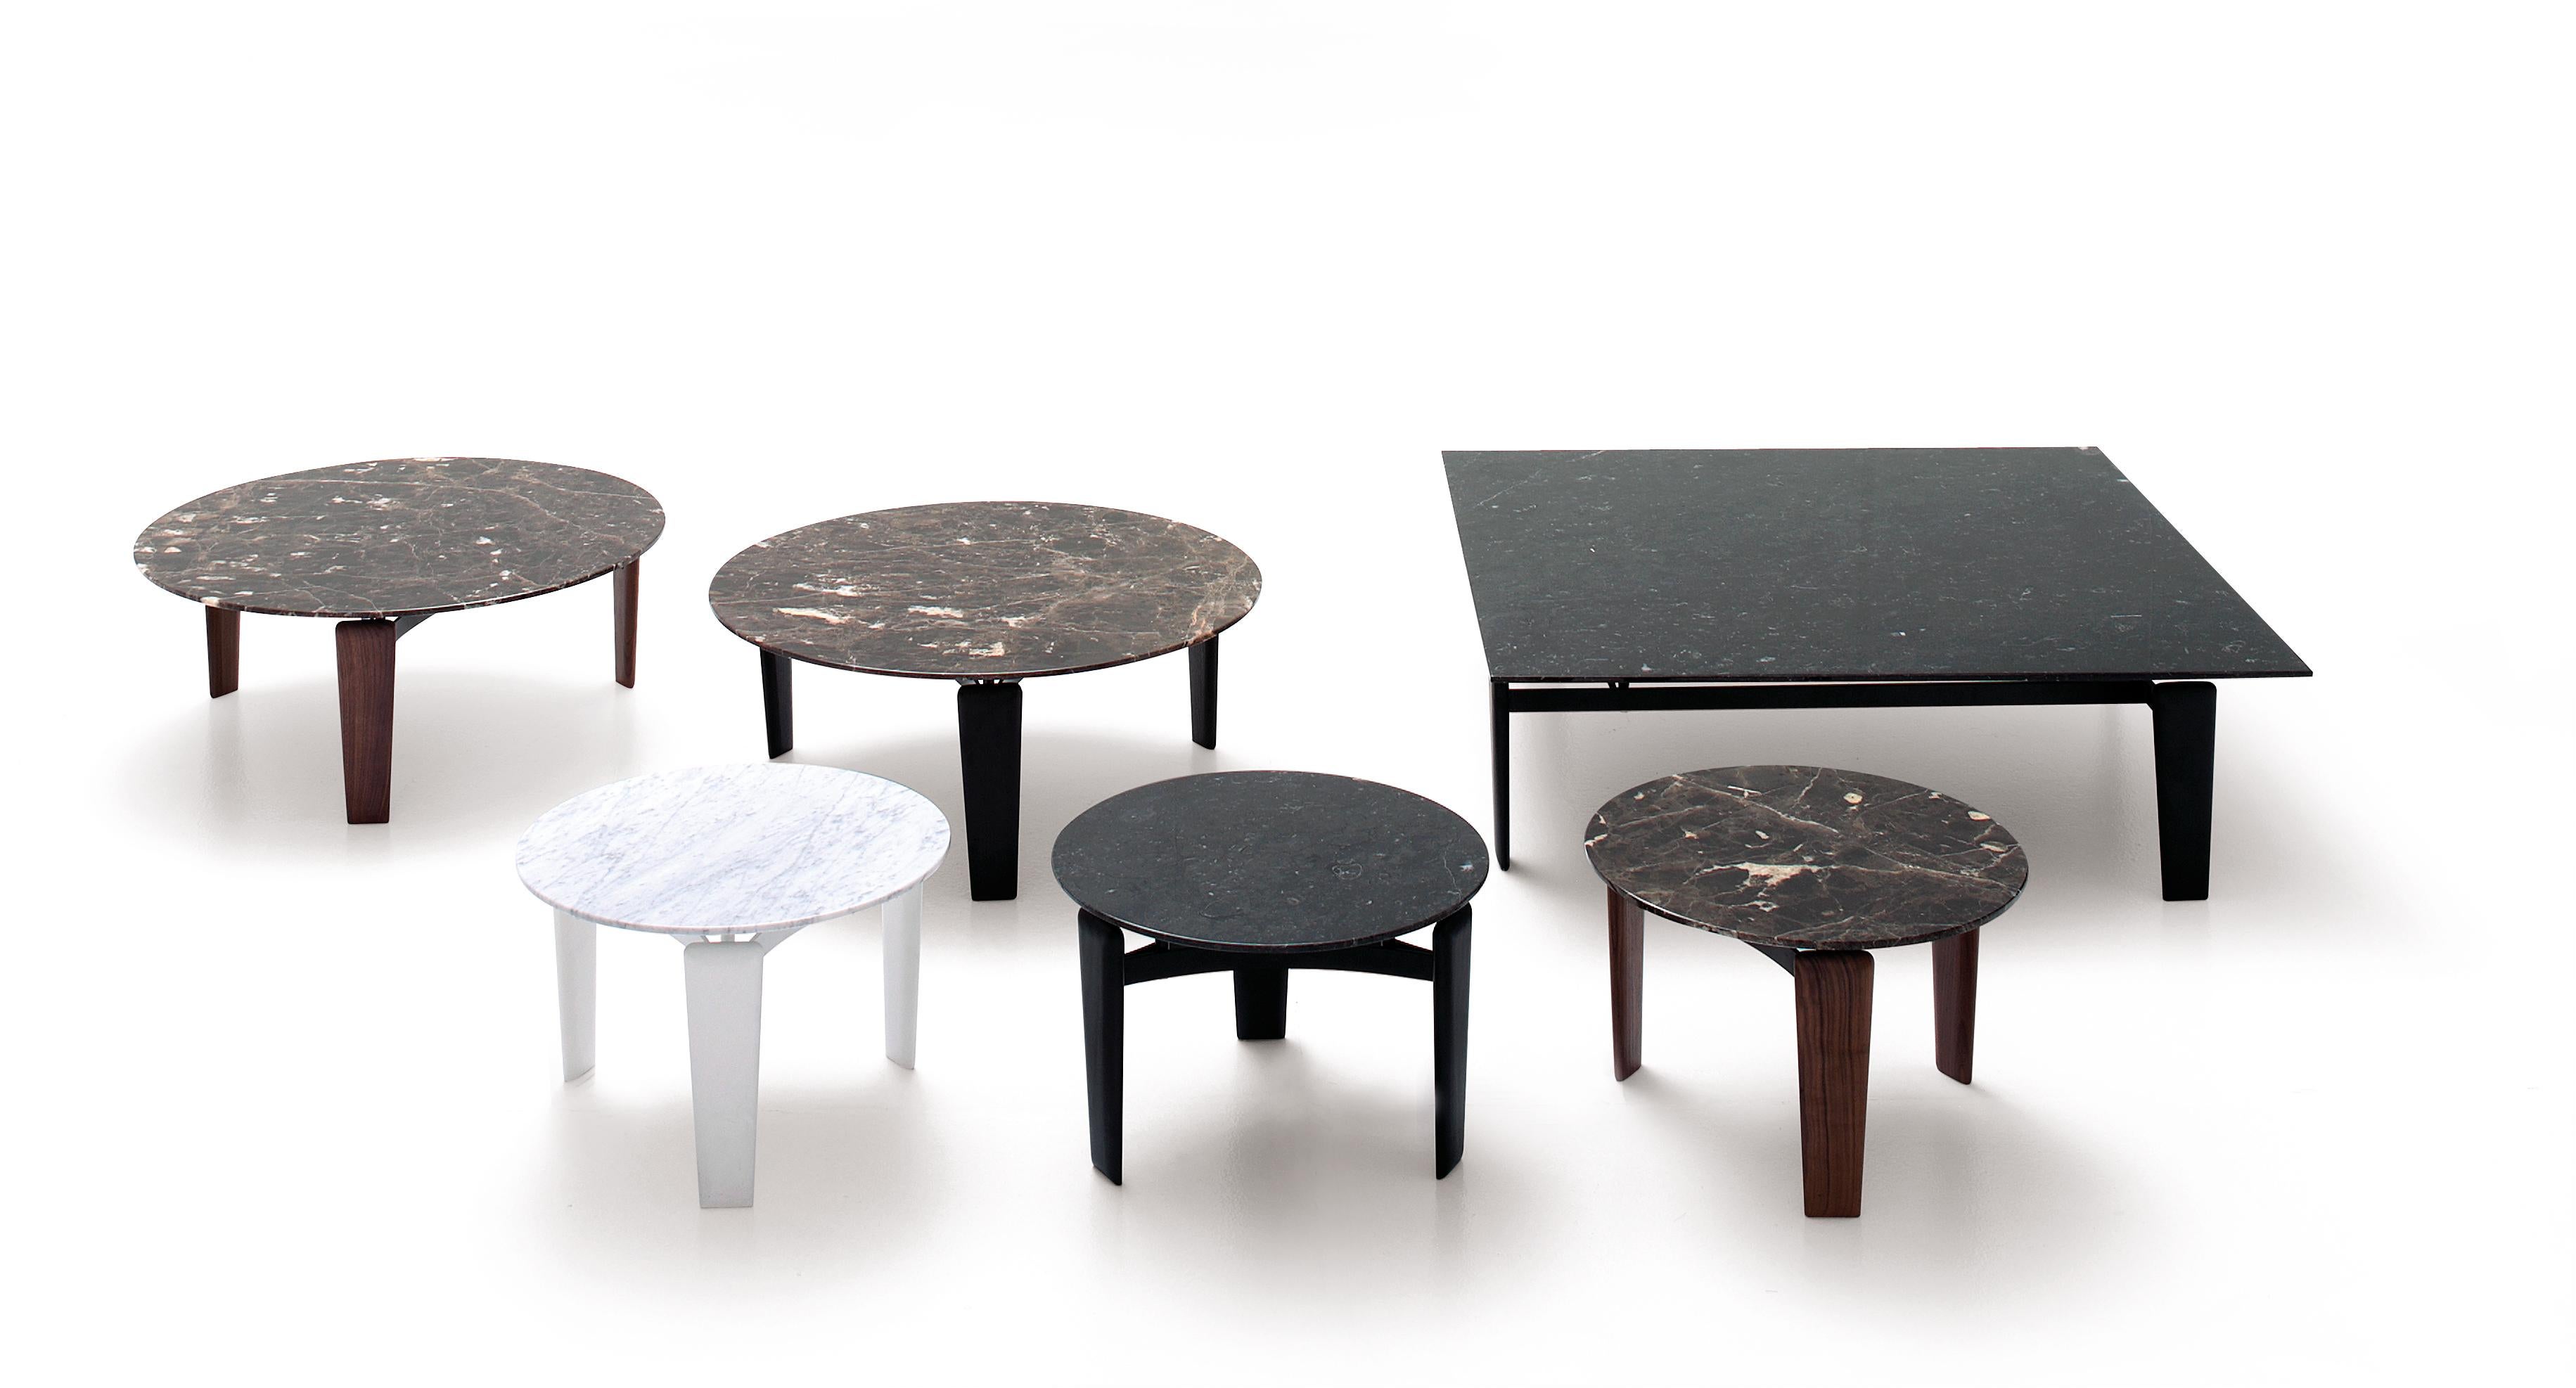 Arflex Tablet High Table in Emperador Marble Top by Claesson Koivisto Rune . The inspiration for their form comes from the ornamental pendants fashioned and worn by the Maori peoples of New Zealand.

Additional Information: 
Materials: Emperador